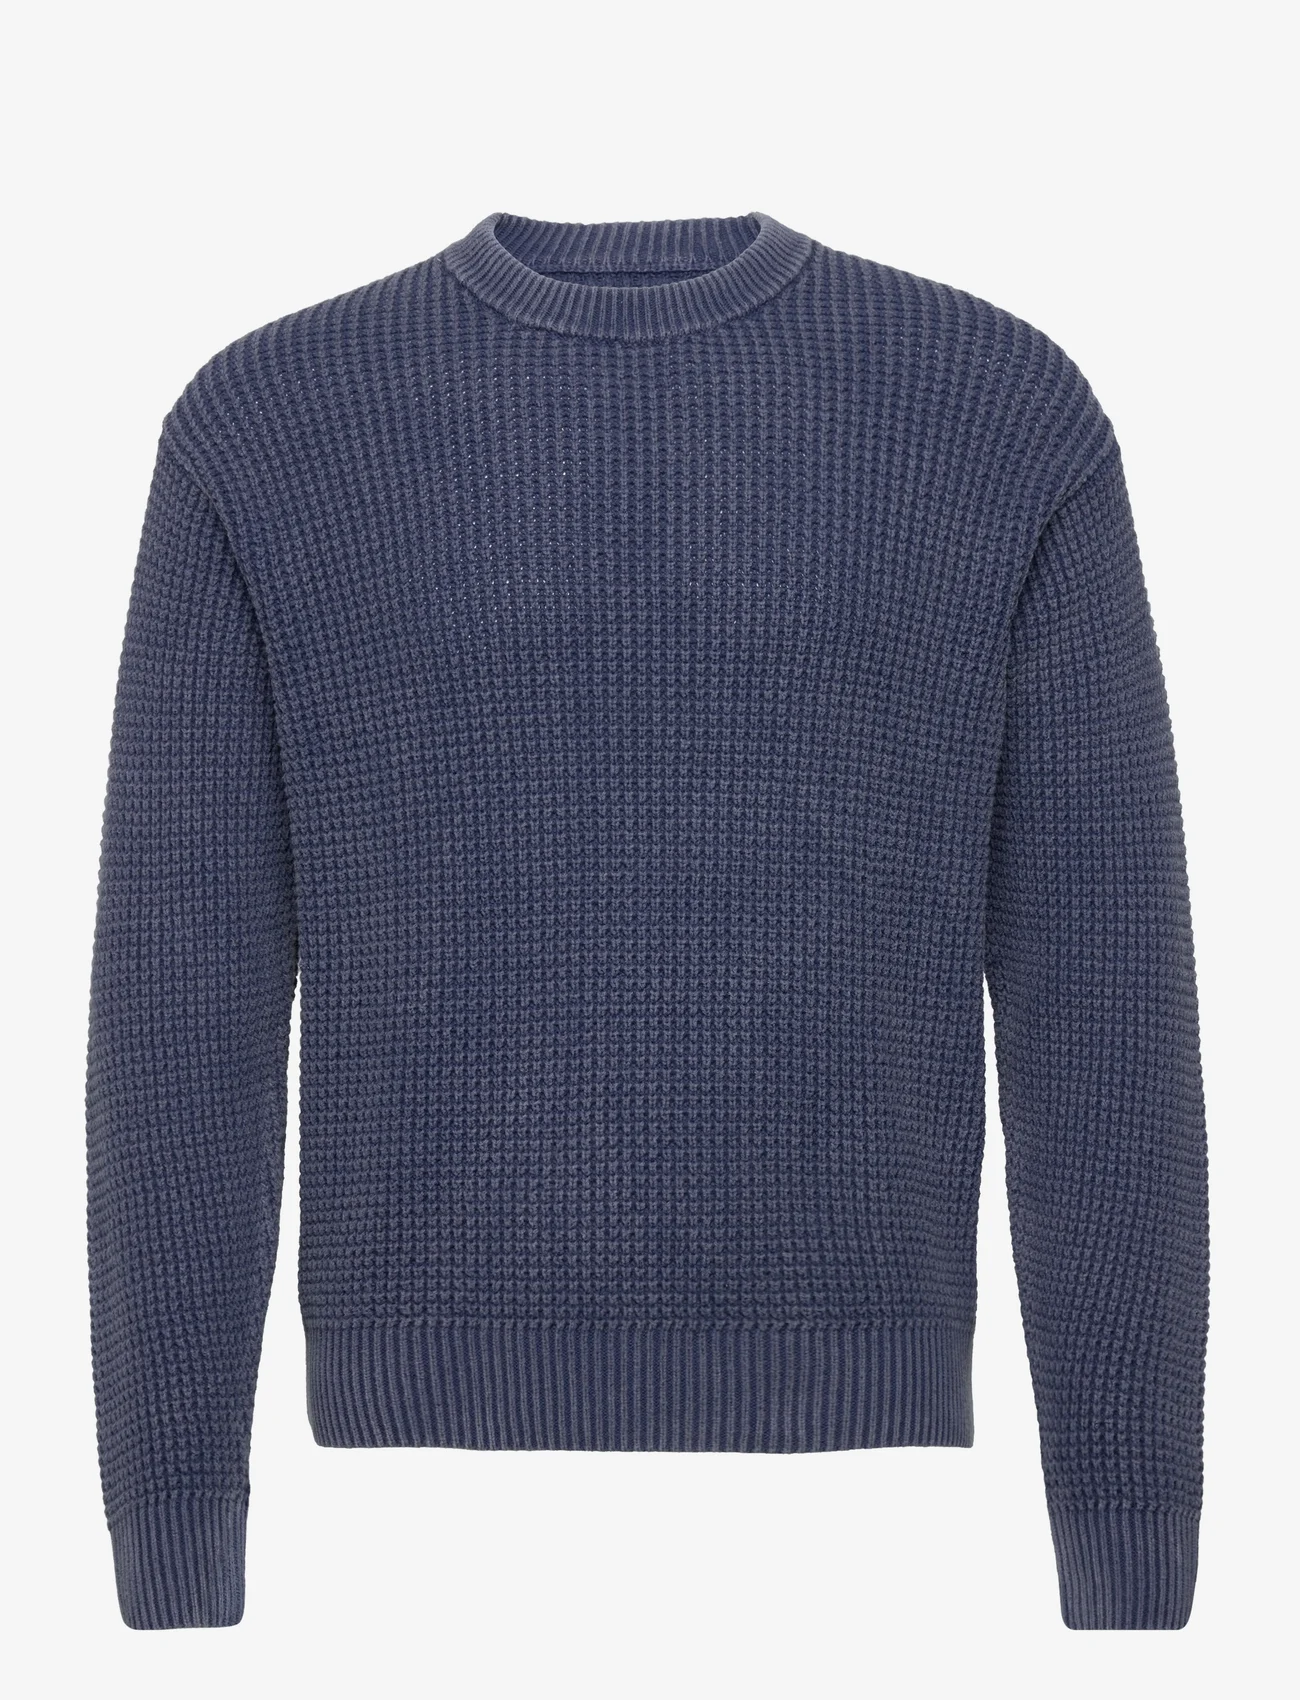 Abercrombie & Fitch - ANF MENS SWEATERS - basic gebreide truien - navy - 0